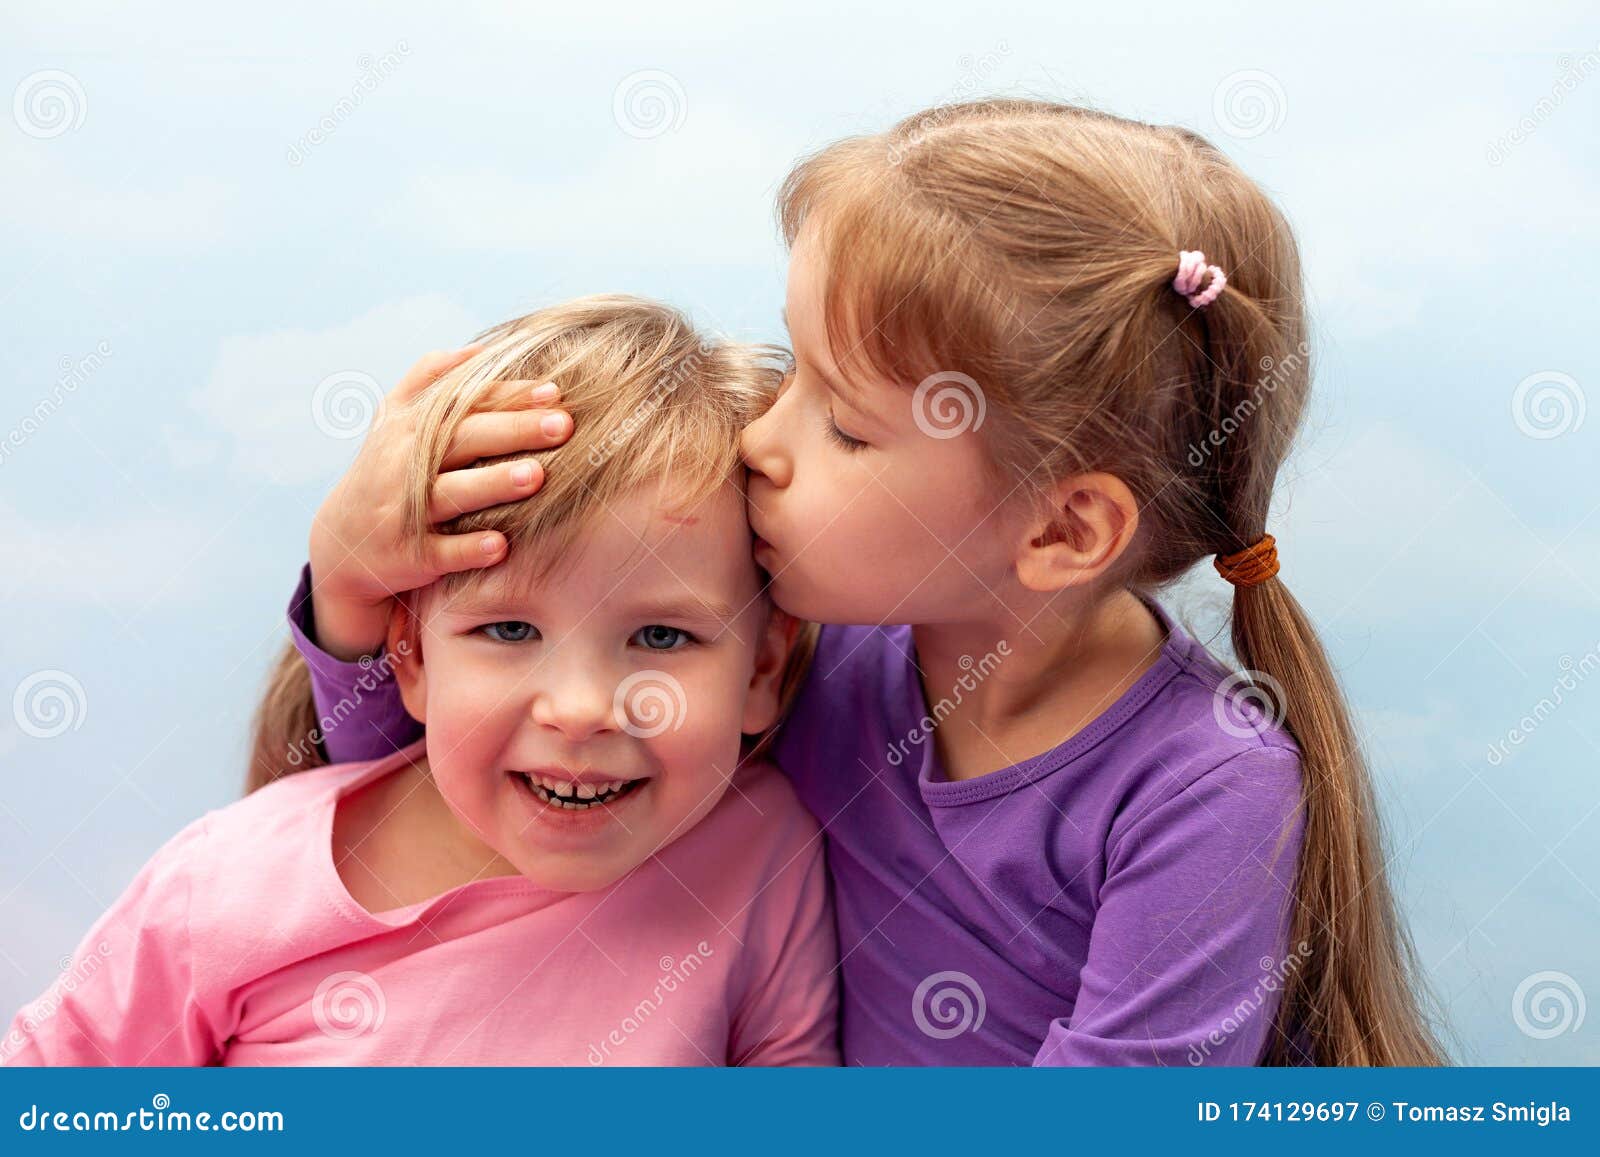 kiss couple and baby babies cute kids children kids cute baby girl baba kiss image picture ...